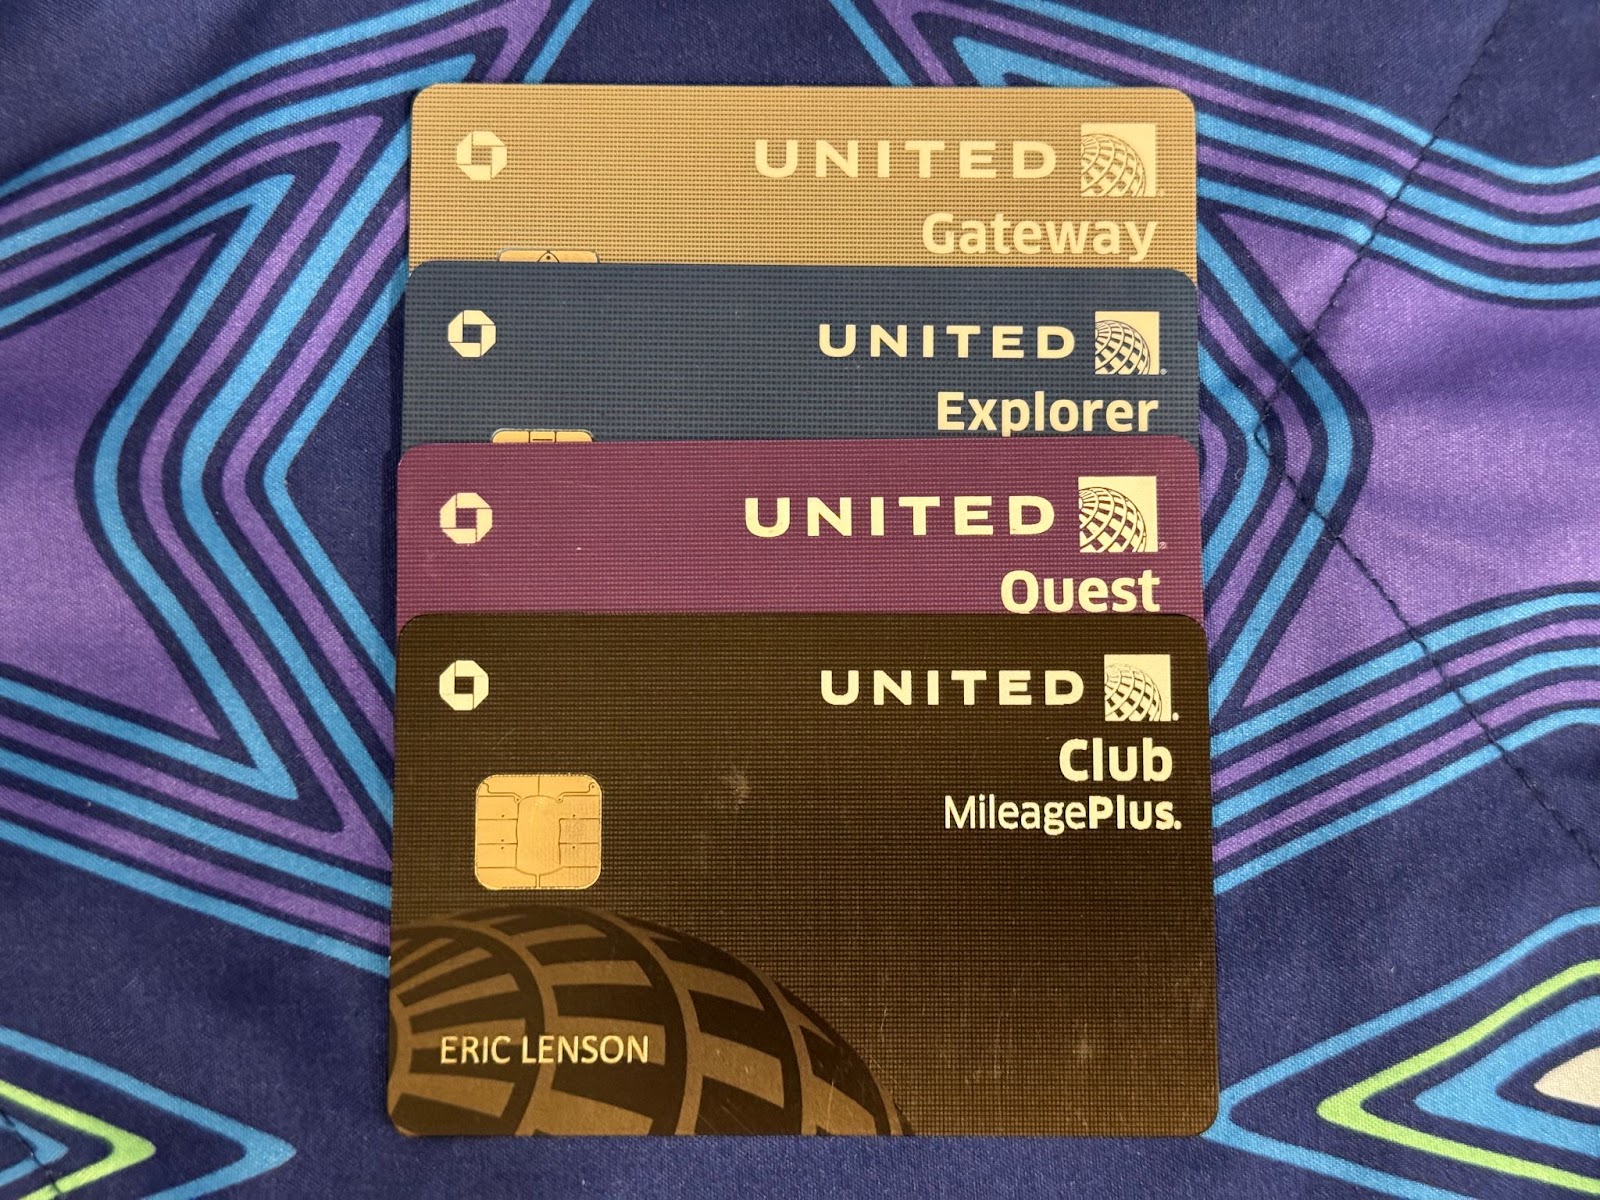 Chase's United Airlines credit cards for travelers who seek comfort and affordability